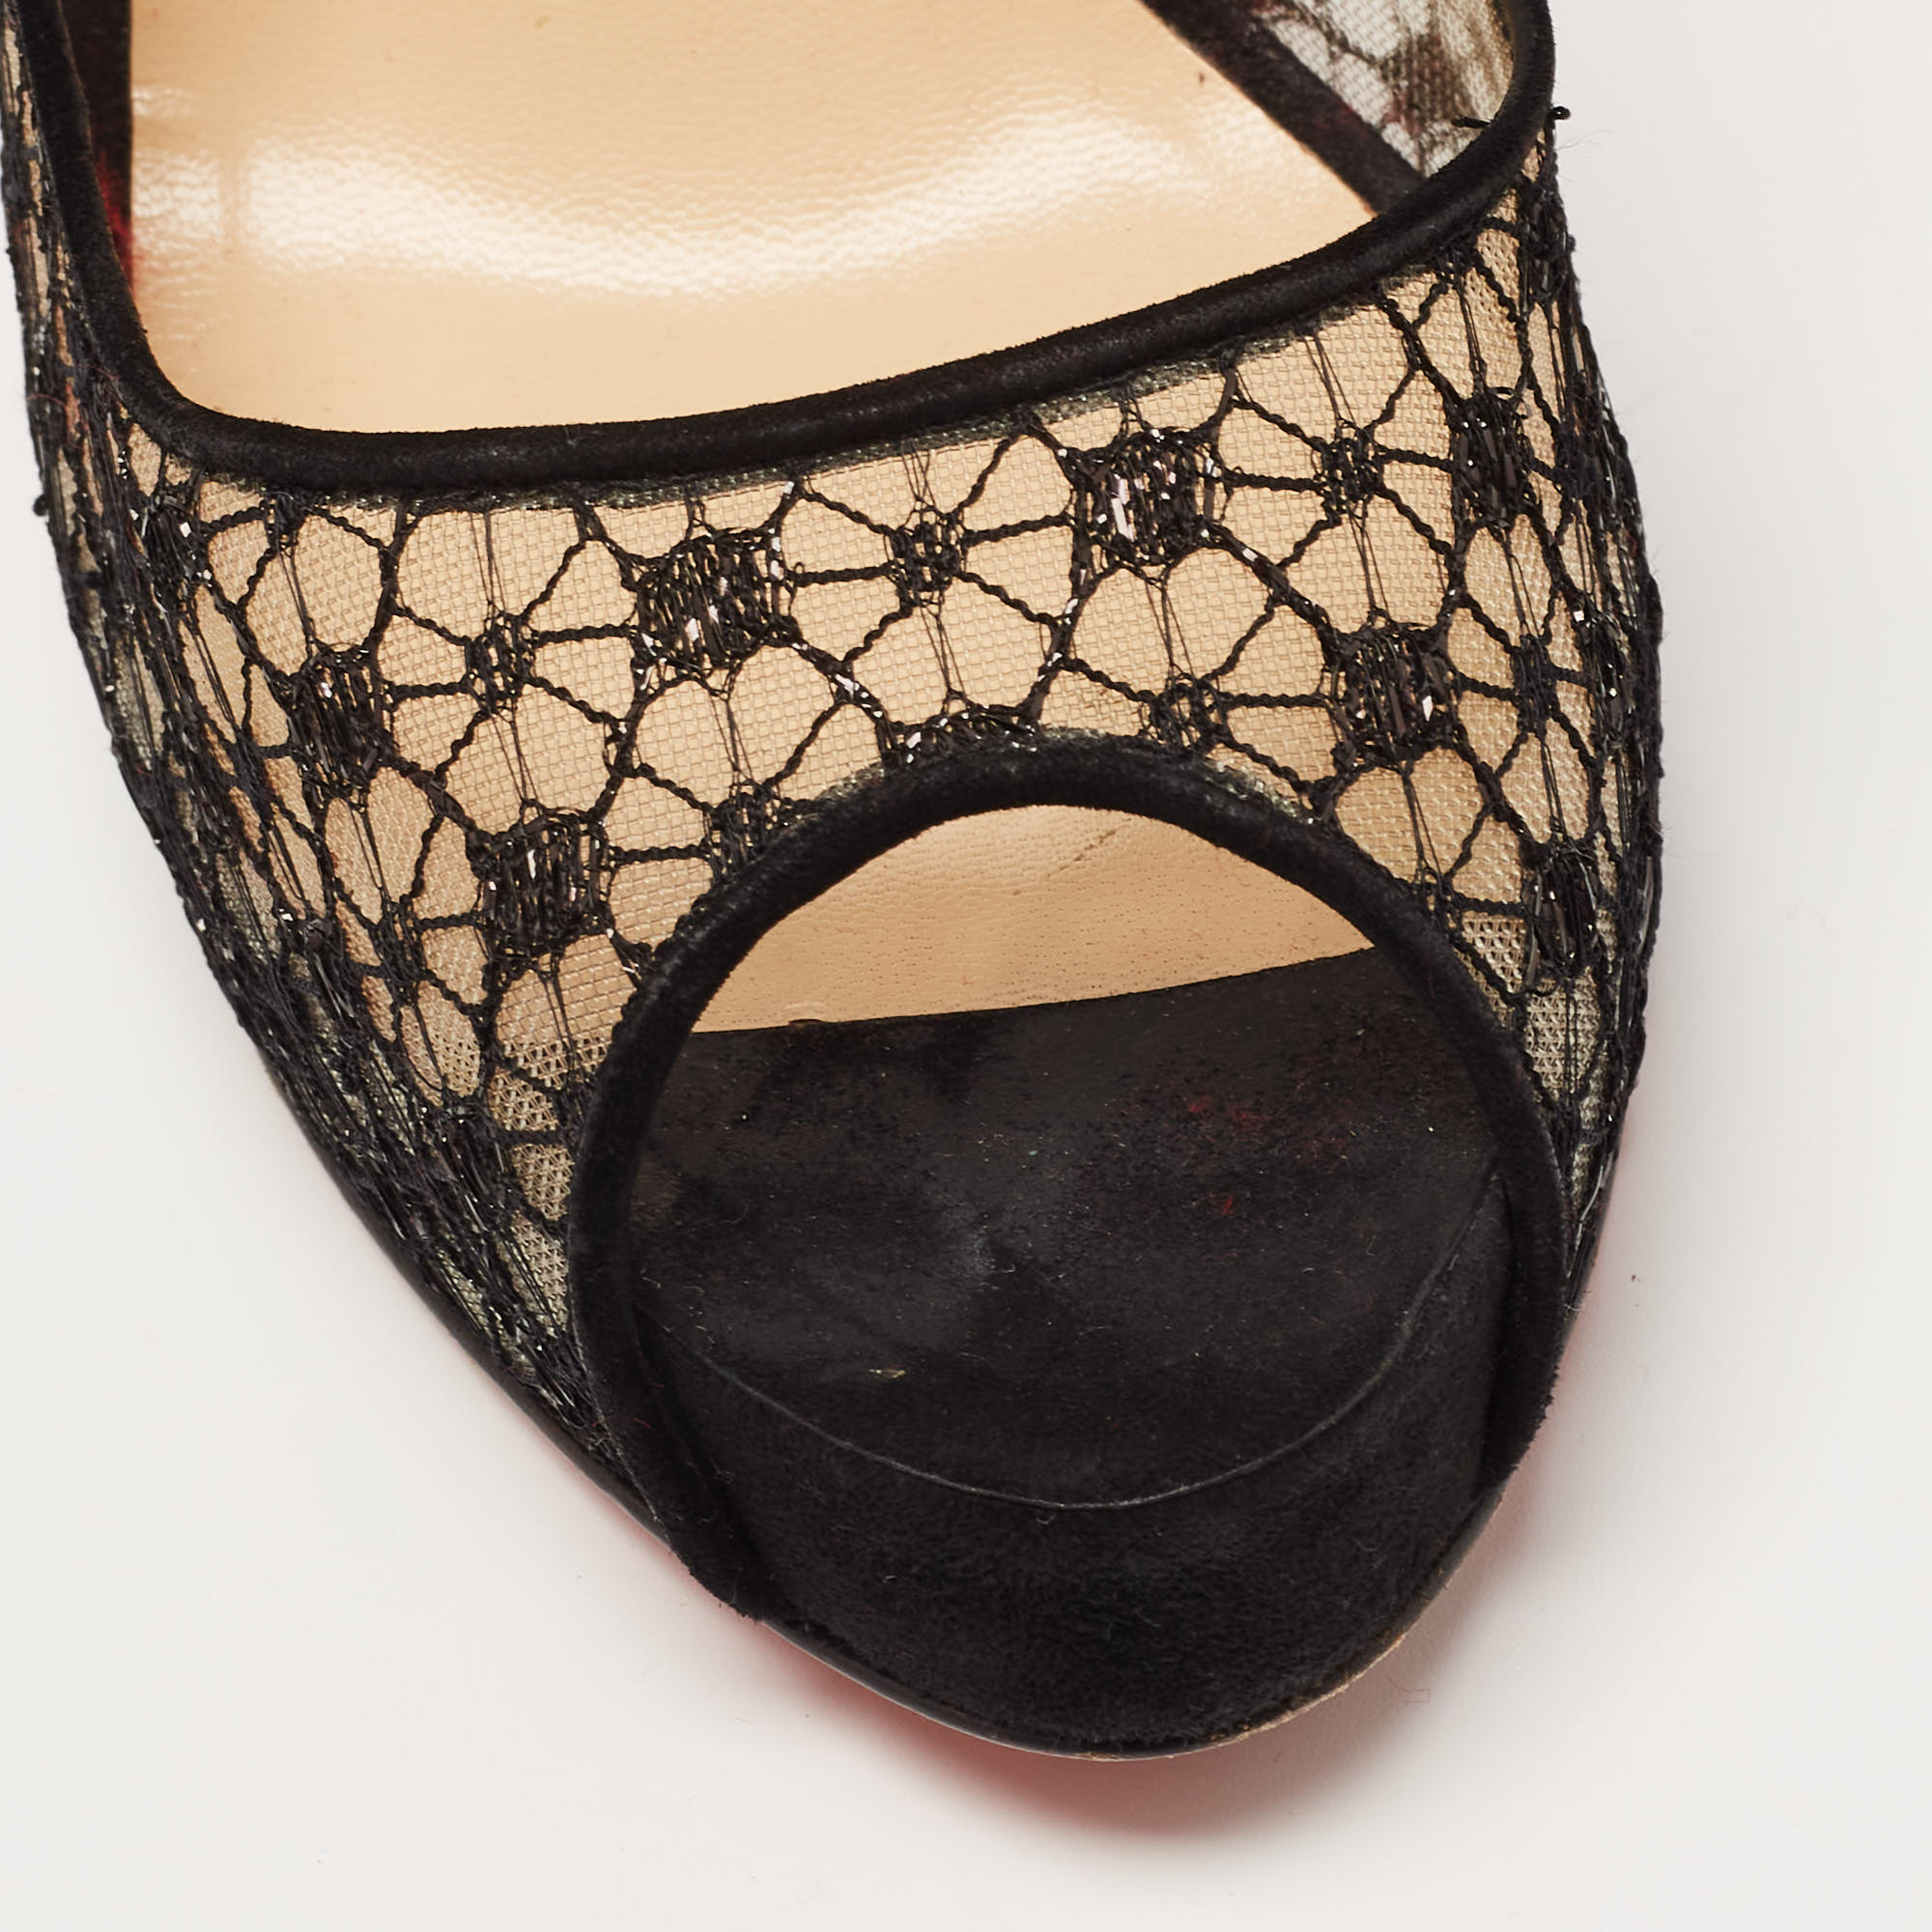 Christian Louboutin Black Lace And Suede New Very Prive Pumps Size 37.5